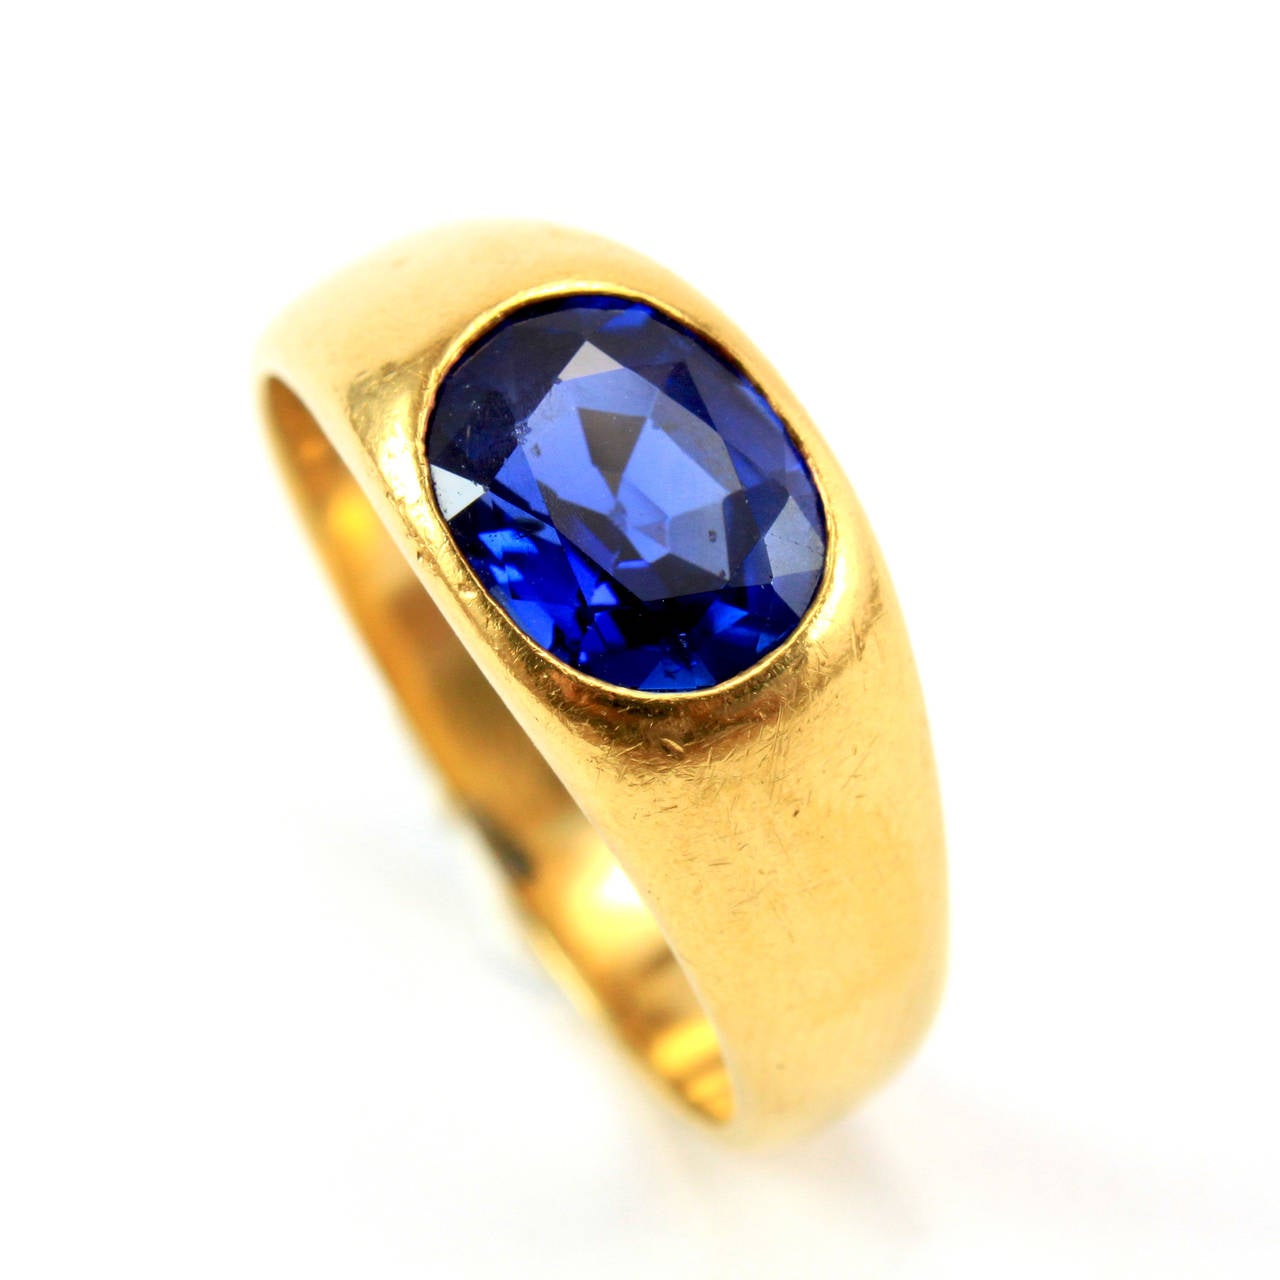 Very attractive men's gypsy ring with a natural (no heat) Ceylon sapphire in yellow gold. The sapphire cushion weighs circa 3.5 carats, is very very clean and has an intense royal blue colour.
The ring is shaped in a way that accentuates the stone